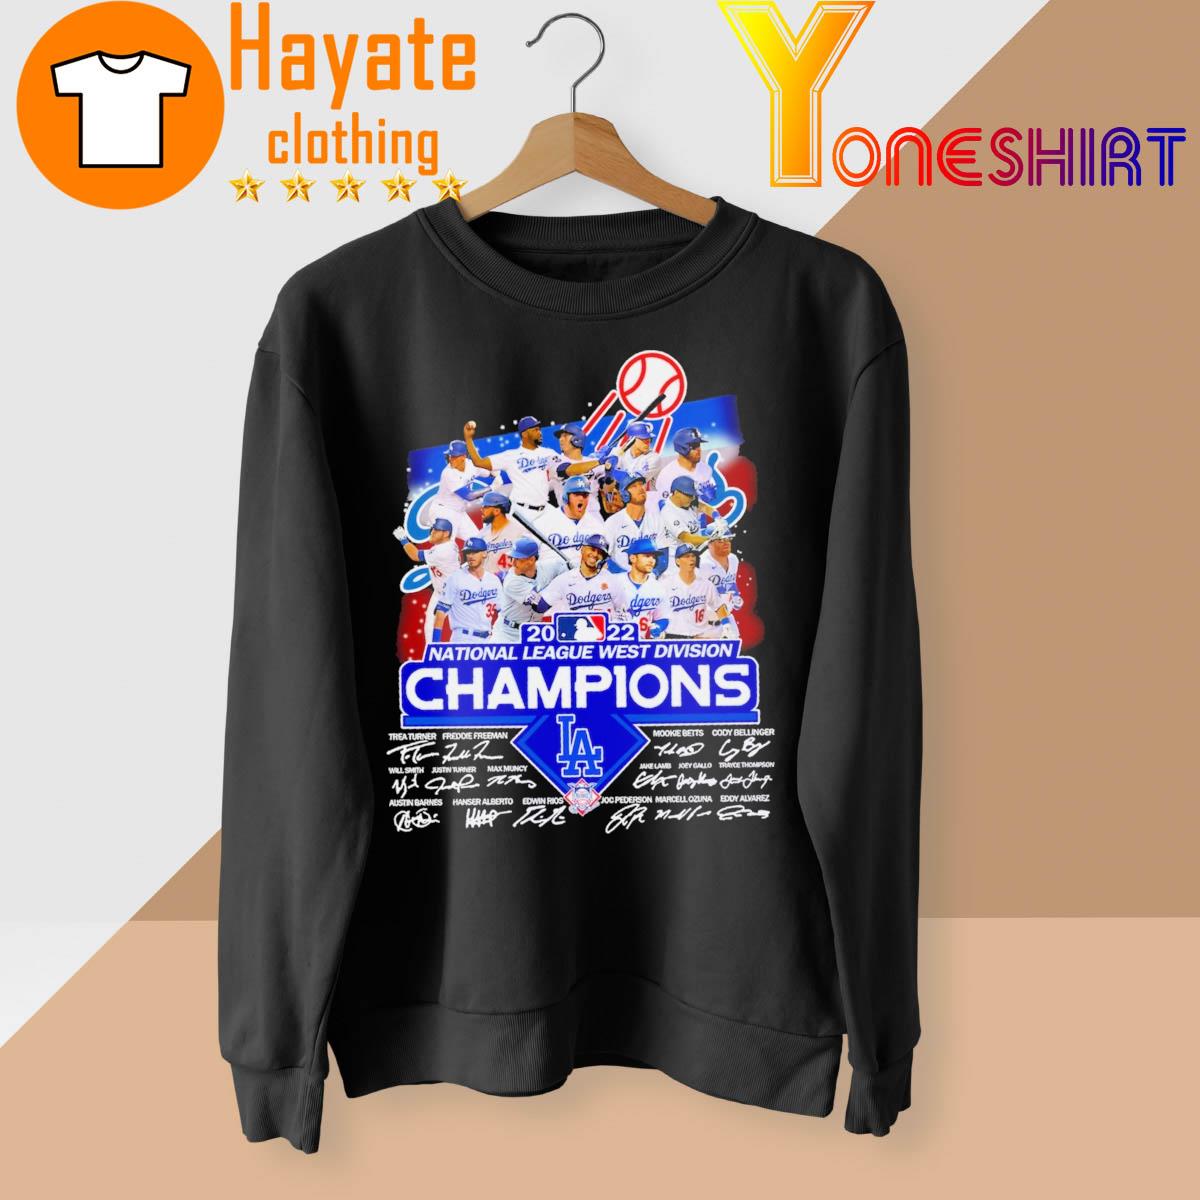 The Los Angeles Dodgers 1974-2023 NL West Division Champions shirt